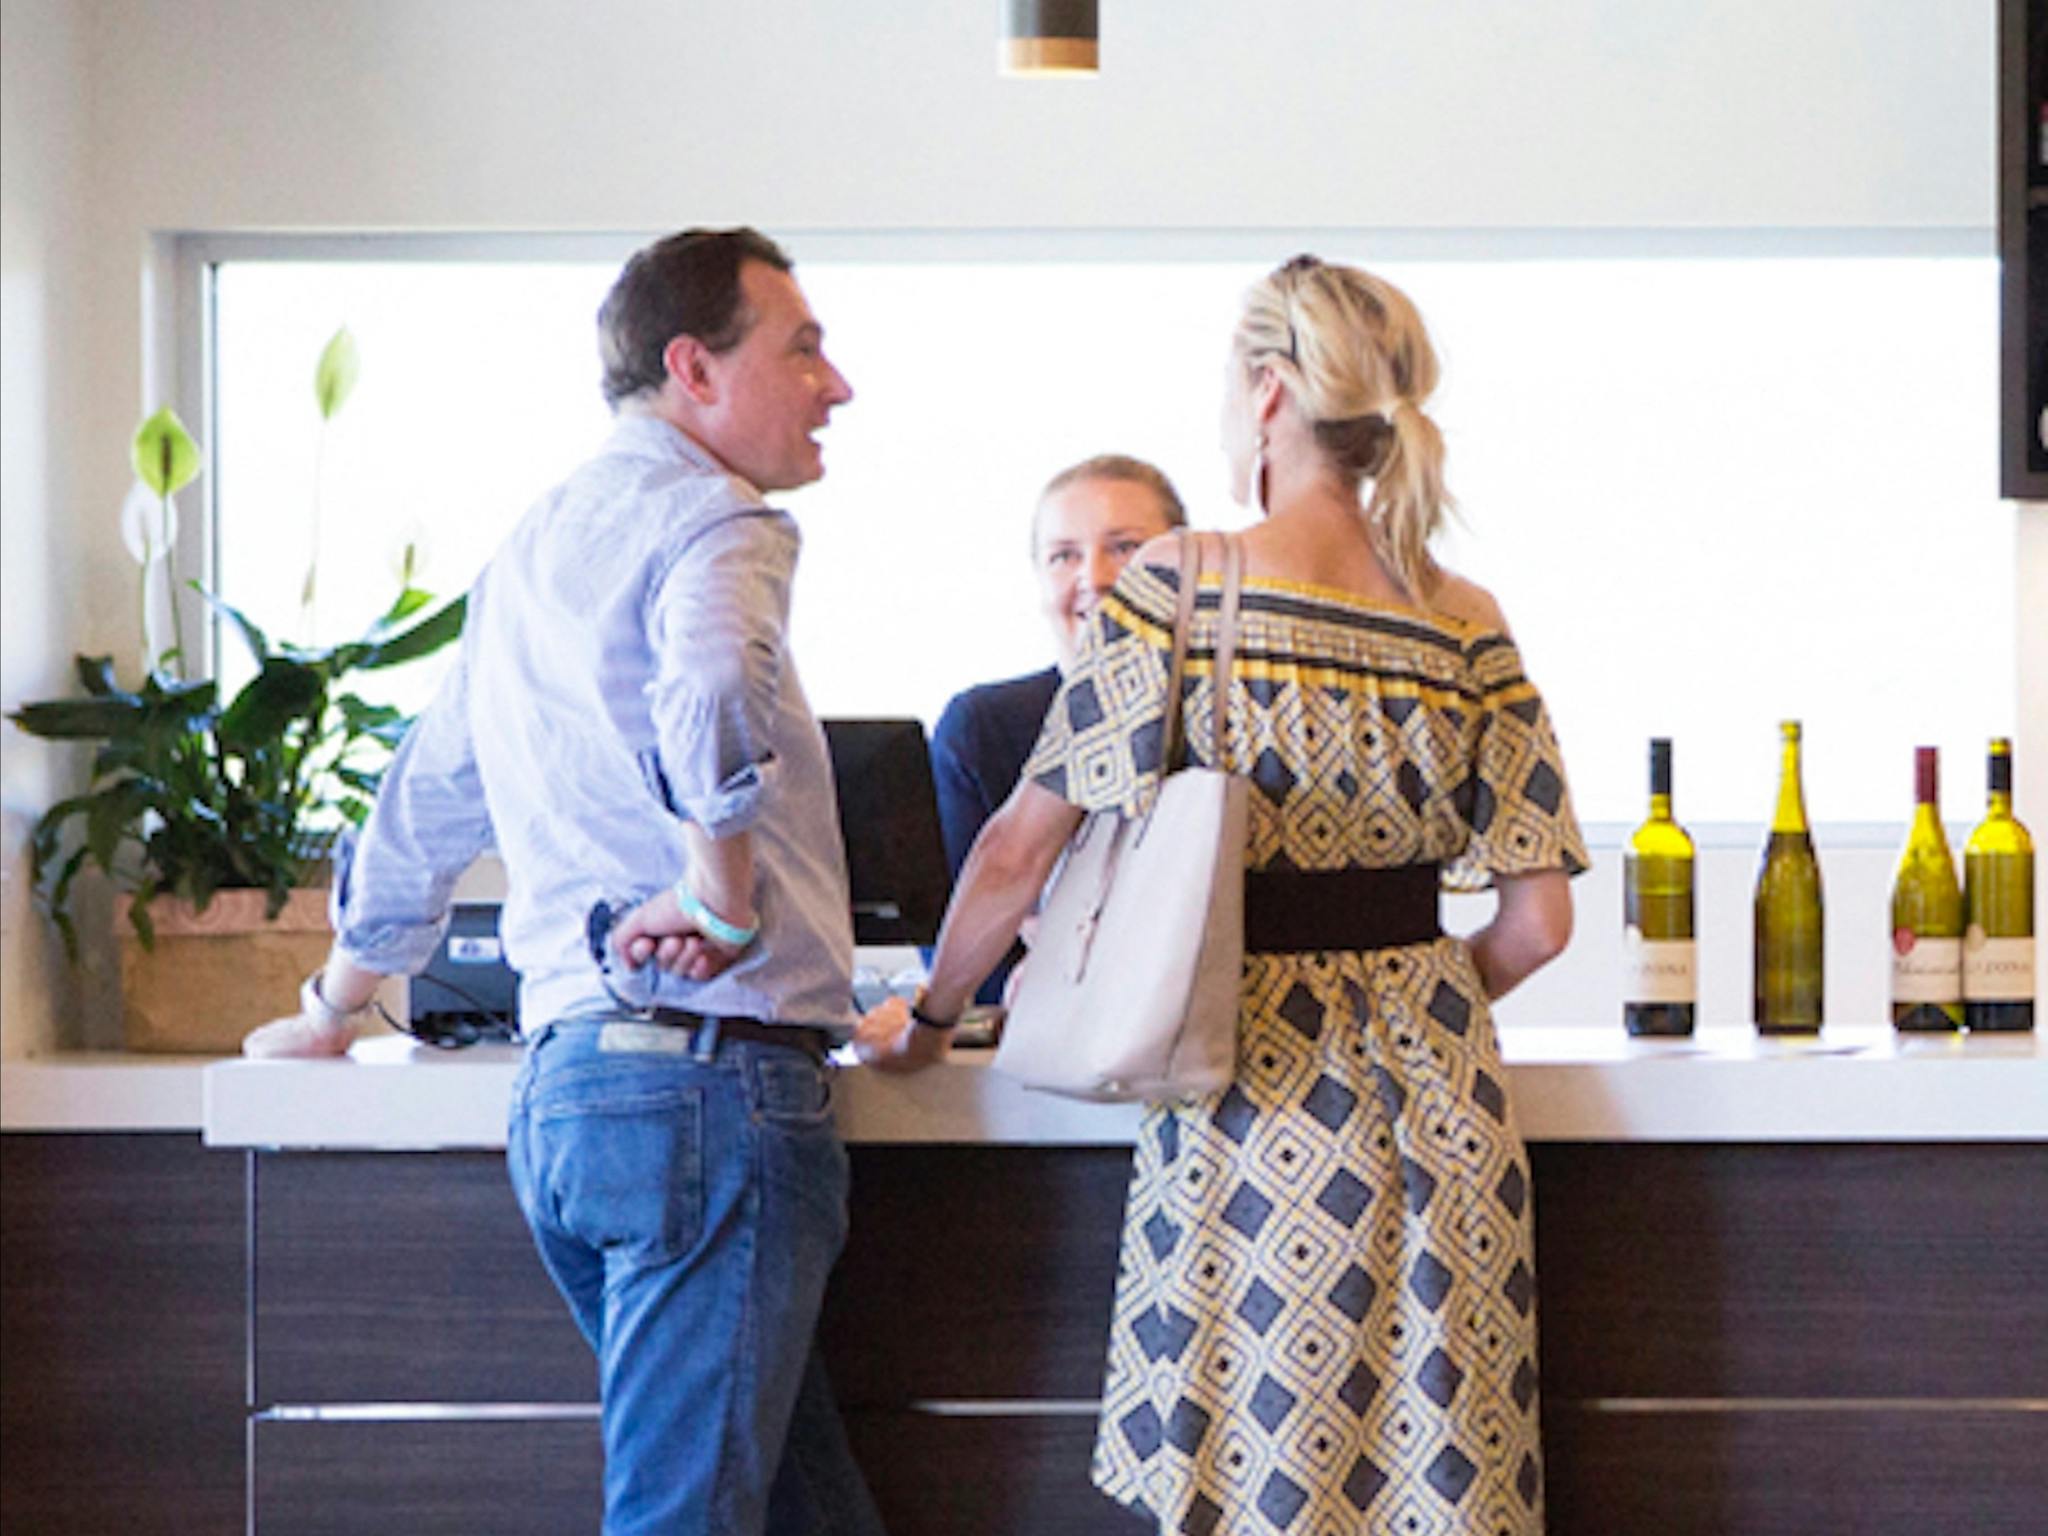 Enjoy a private tasting at Cellar Door, just a few minutes stroll away